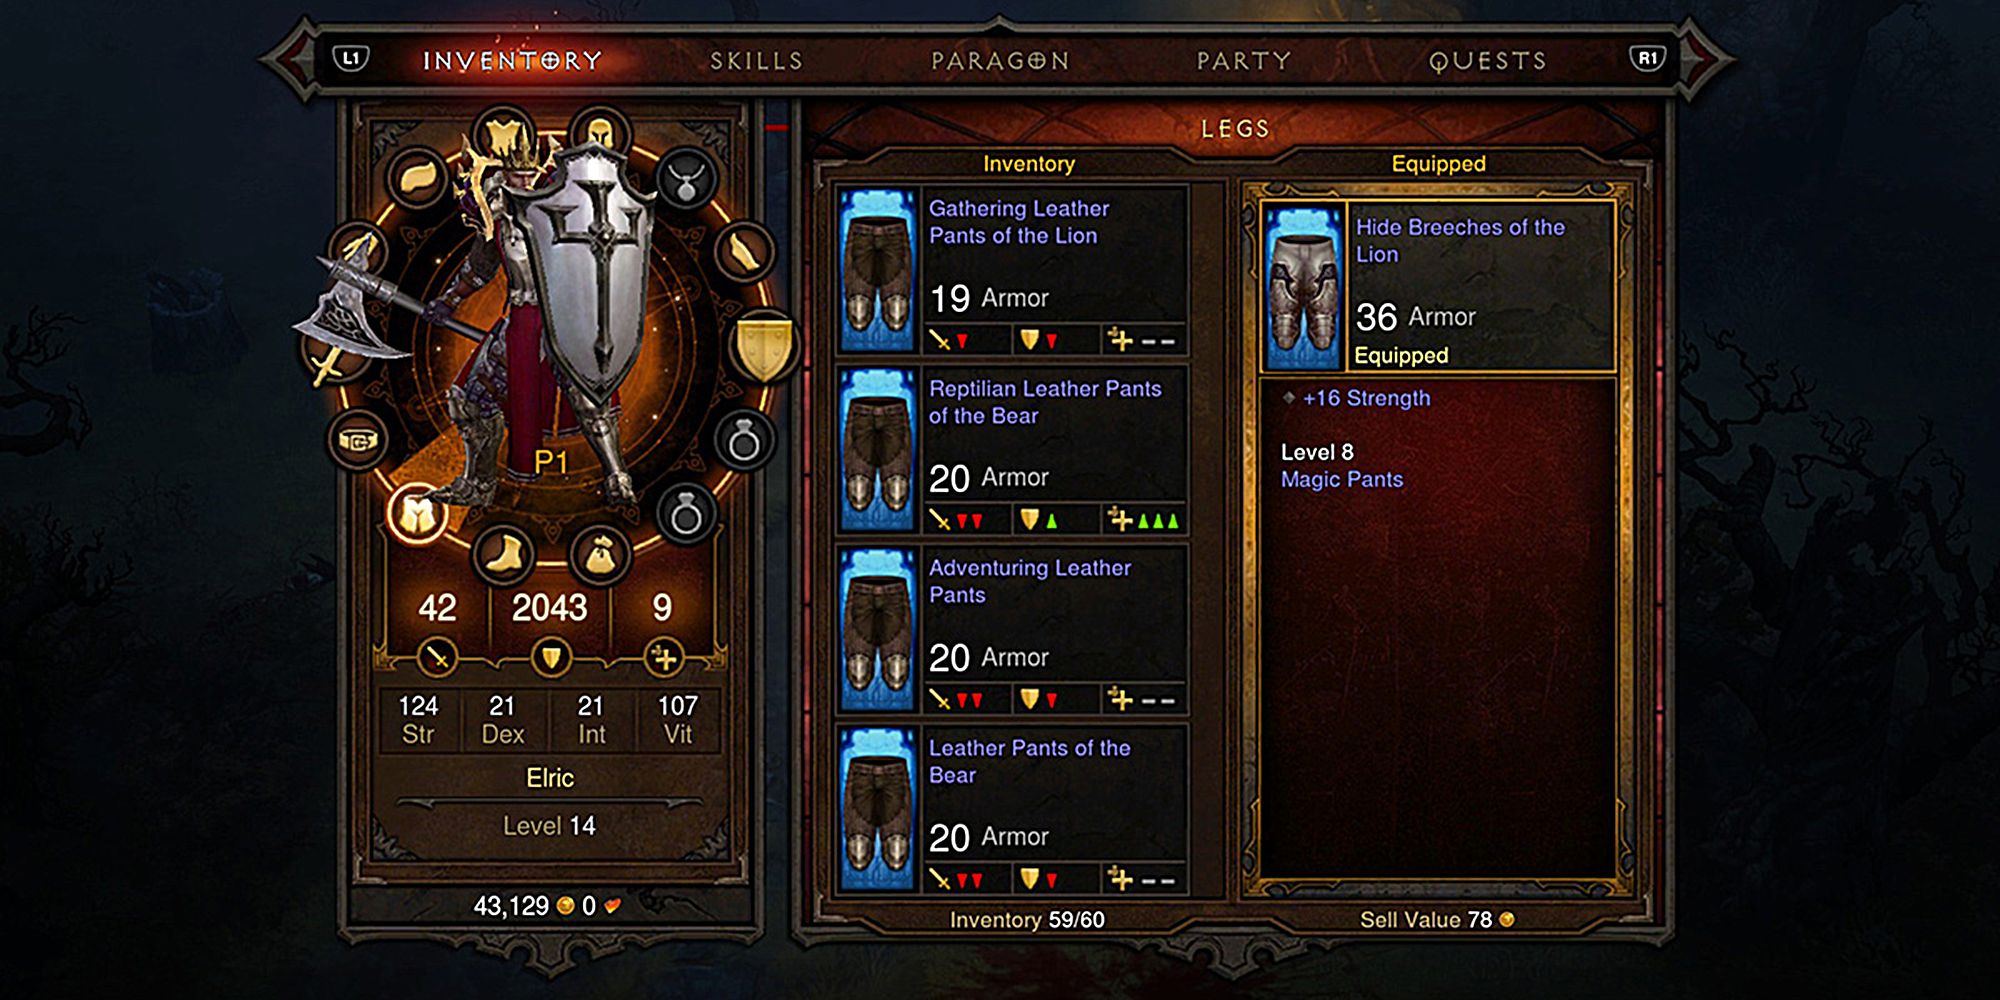 Inventory System of Diablo 3 on Playstation